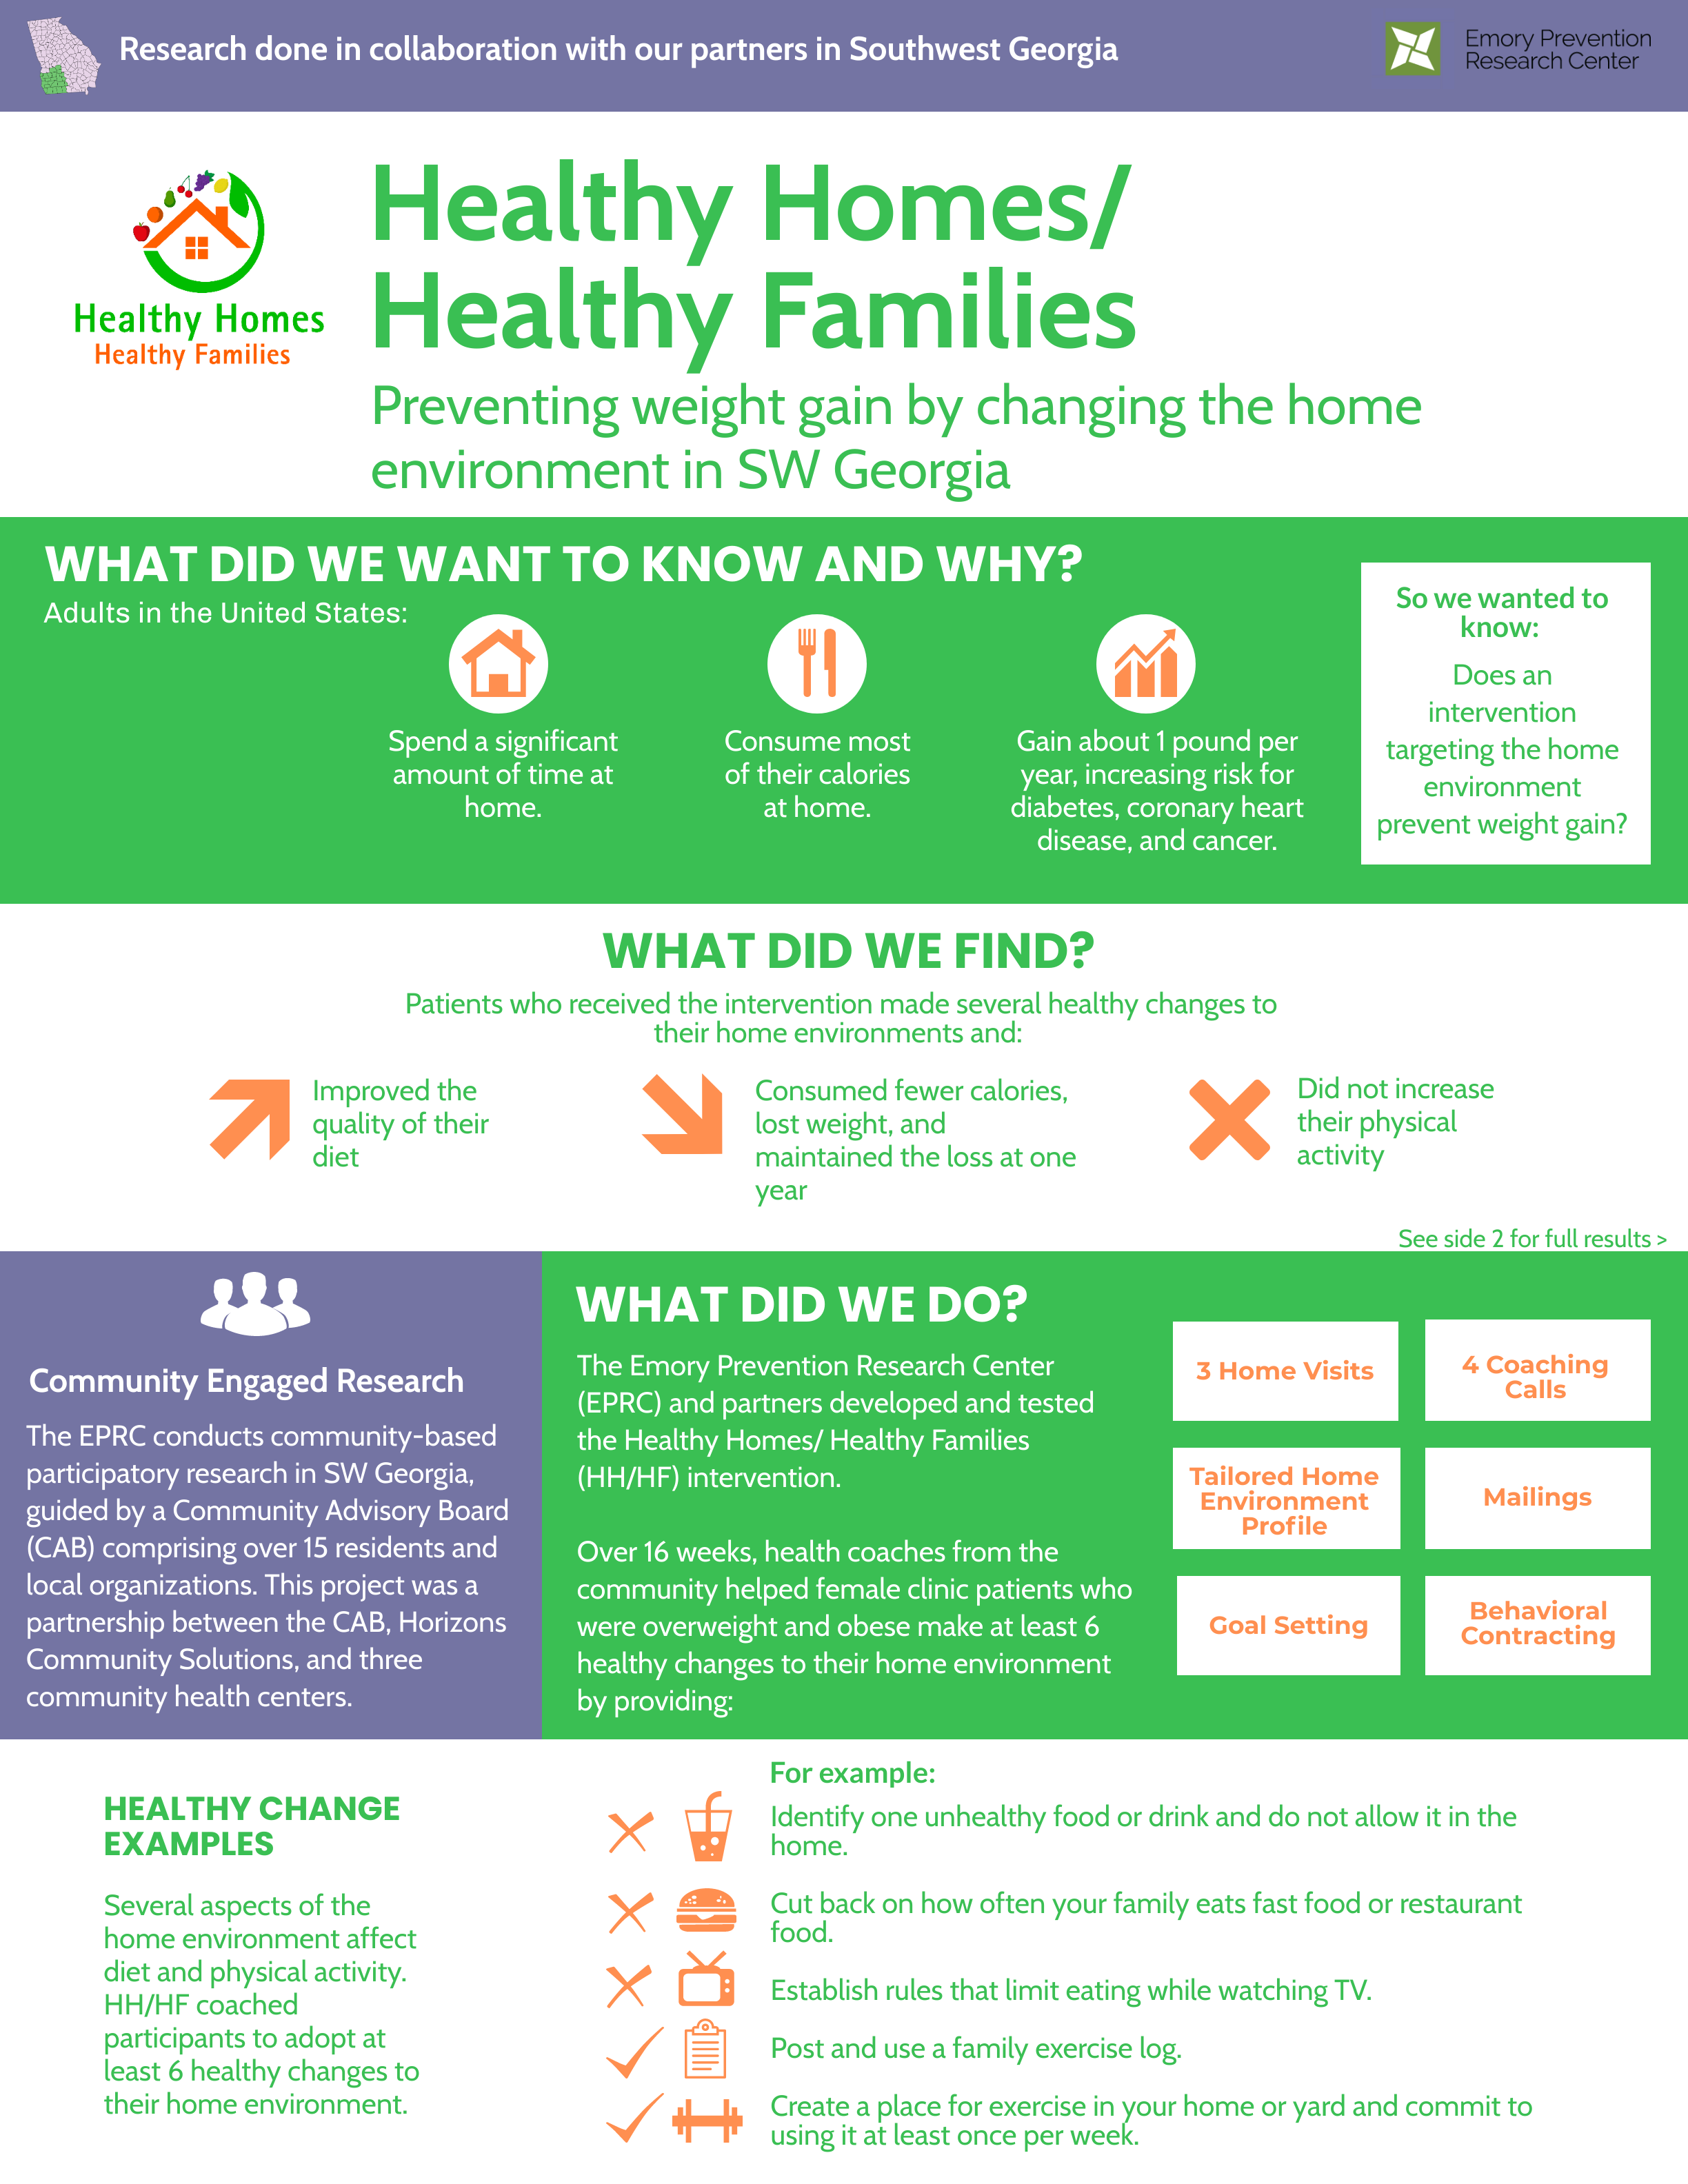 Healthy Homes Healthy Families